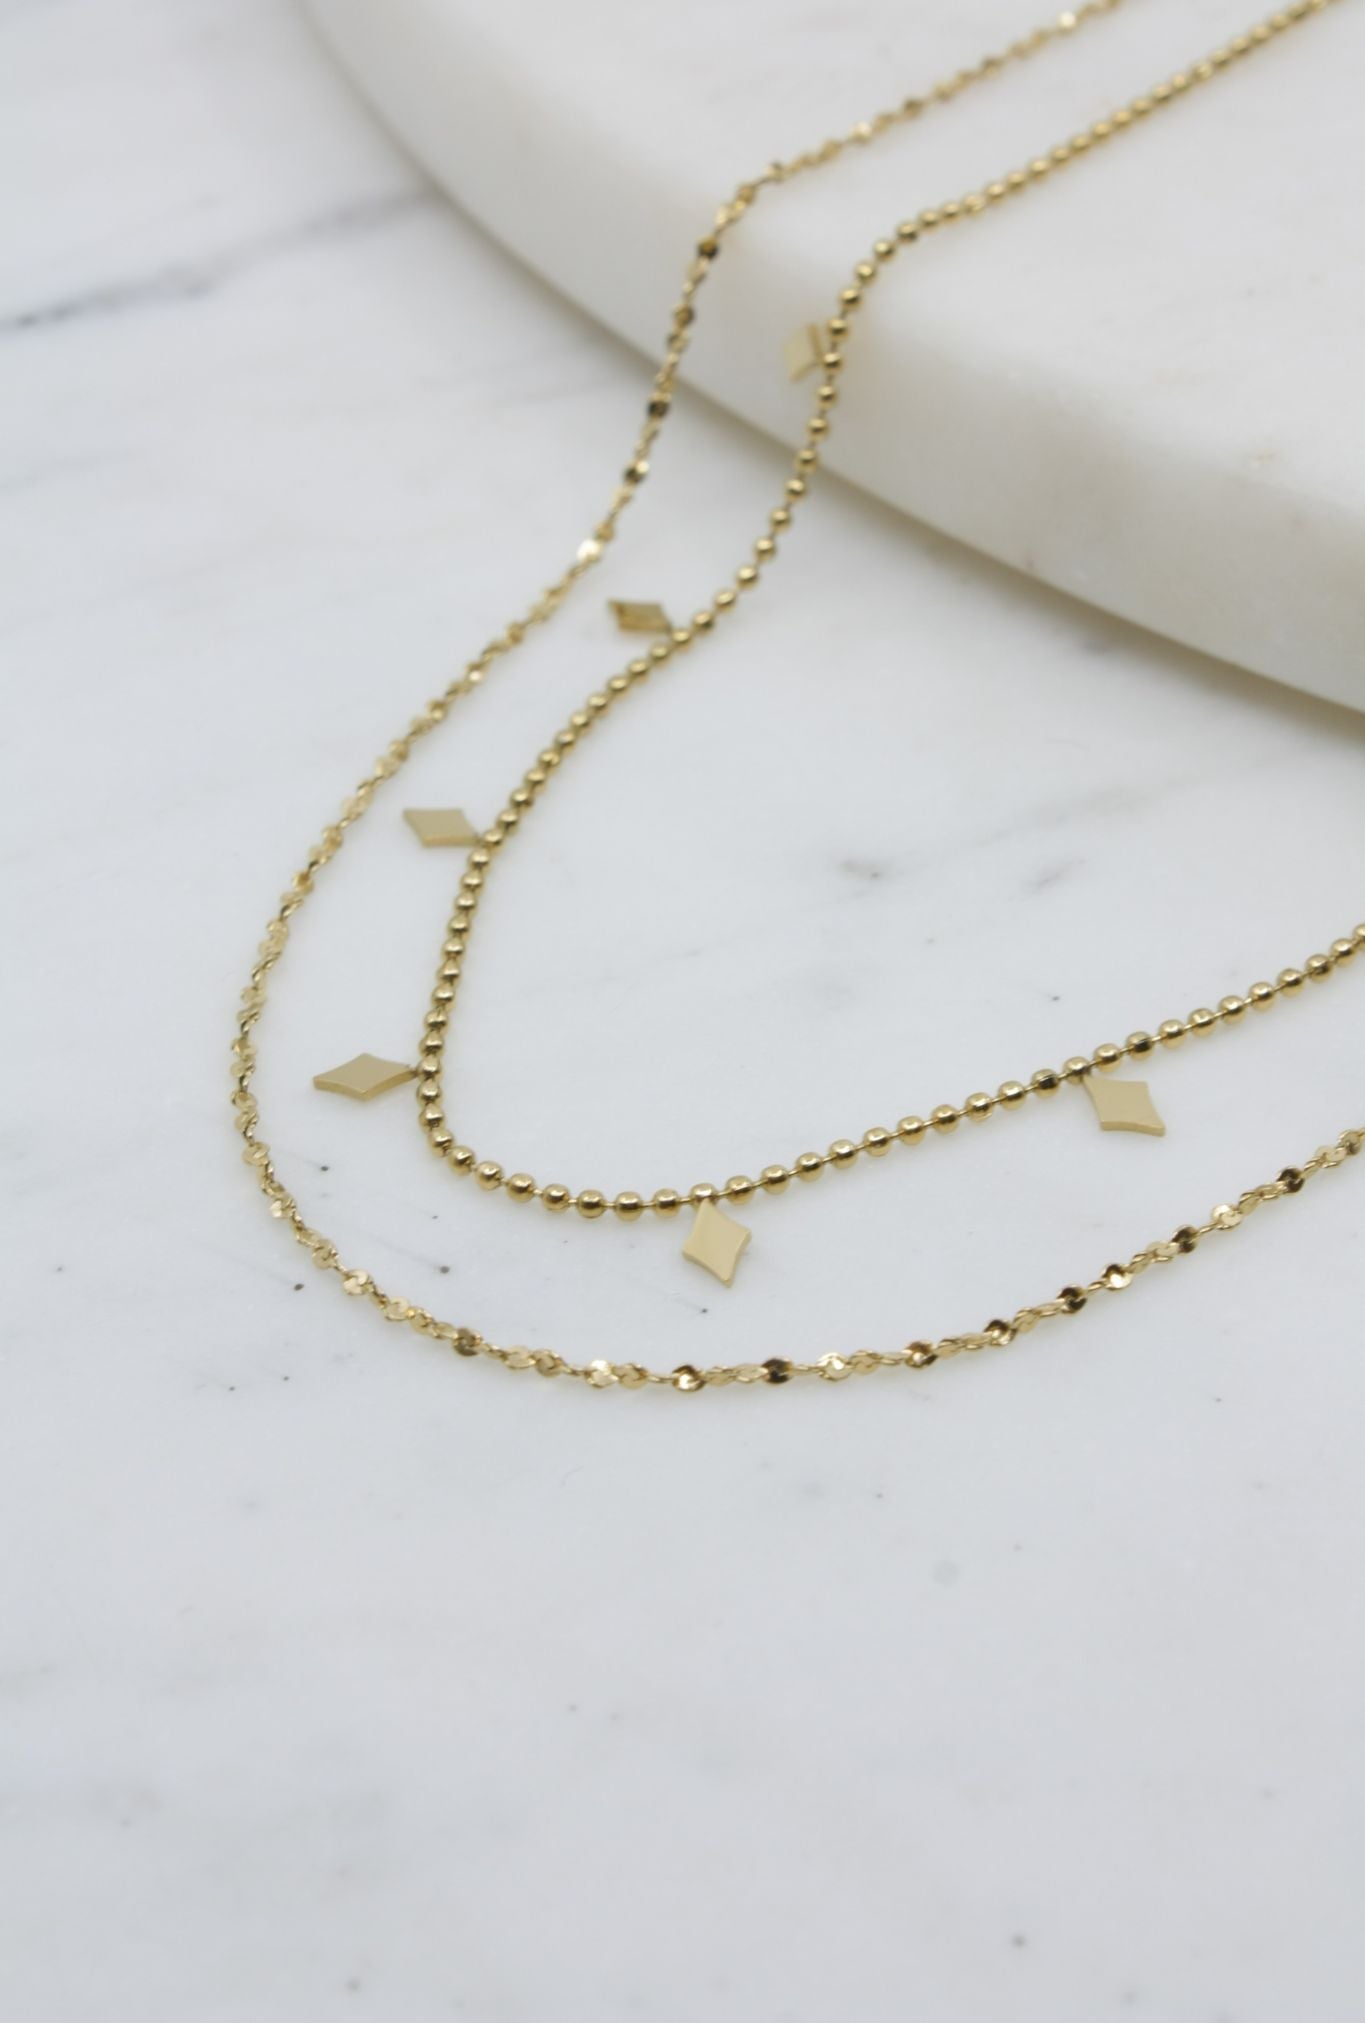 Double Layered Necklace with Diamond Shaped Accents